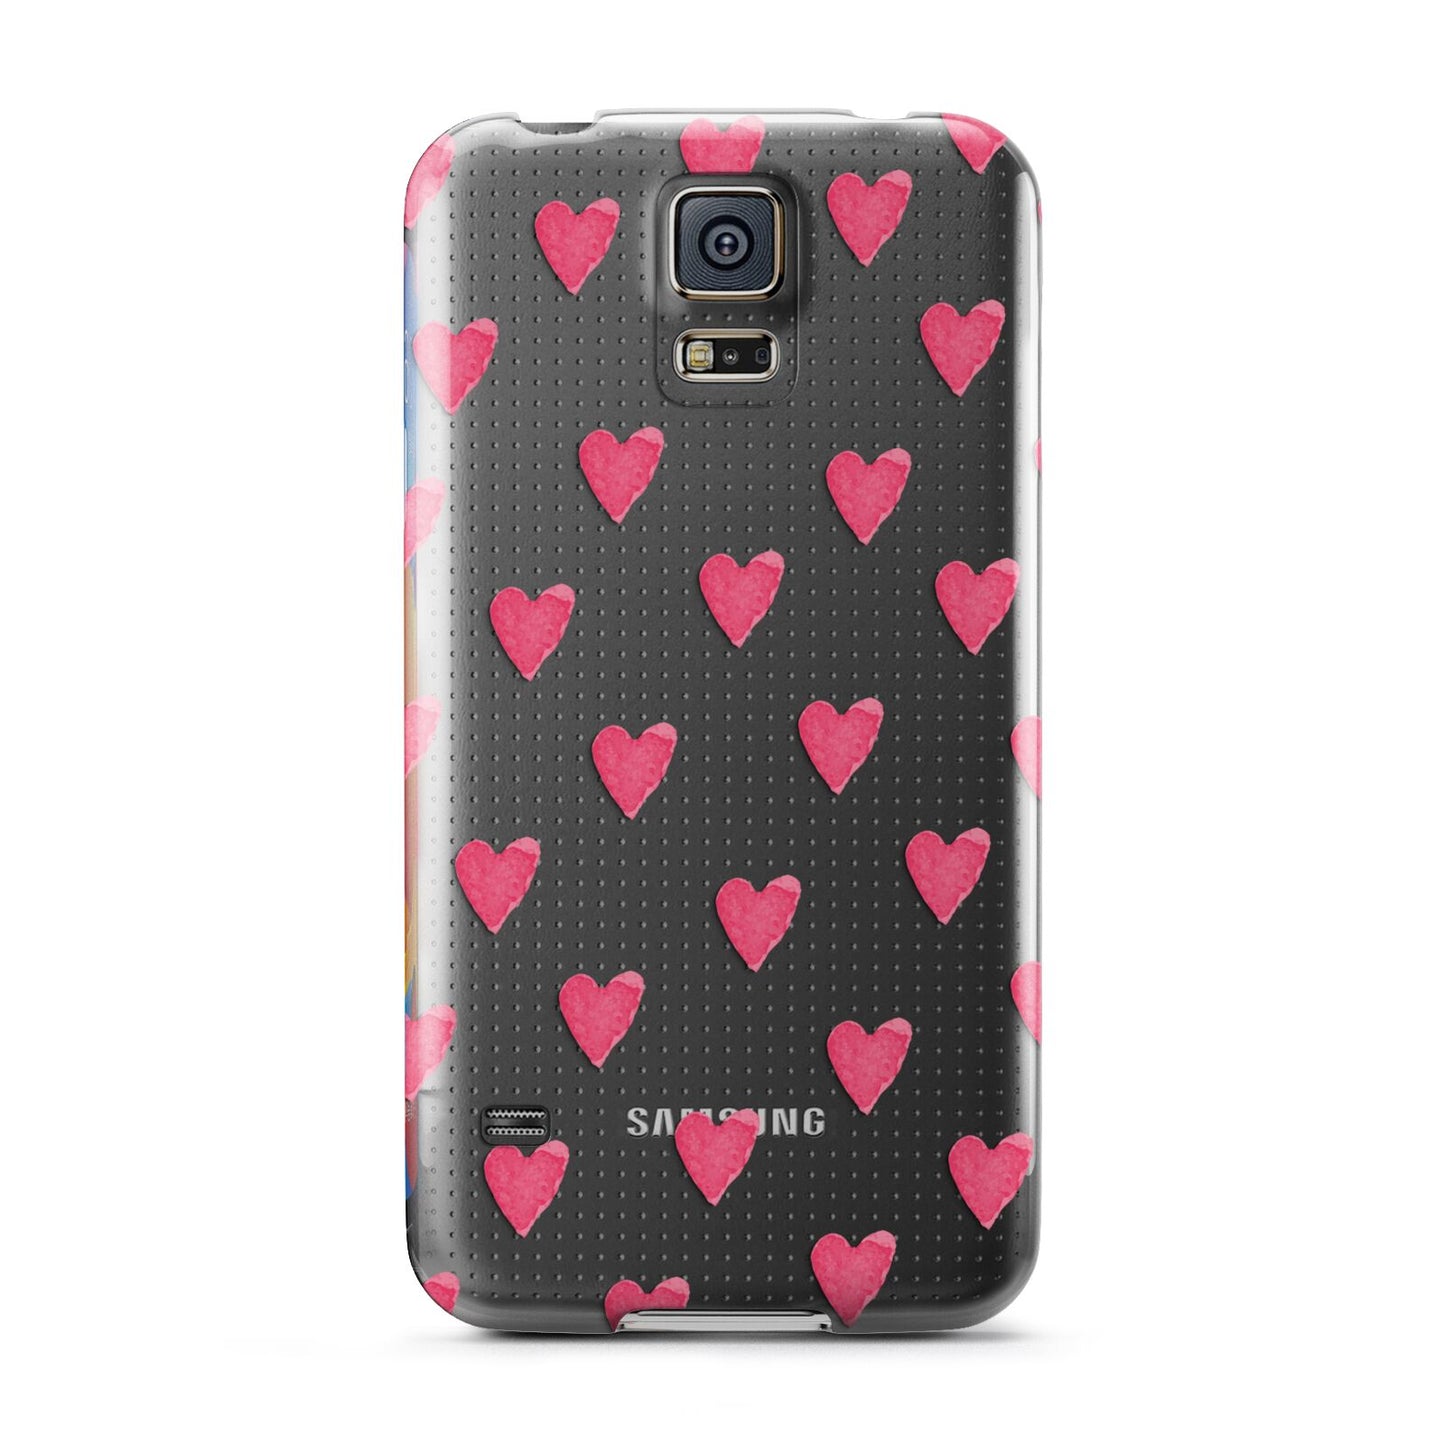 Heart Patterned Samsung Galaxy S5 Case